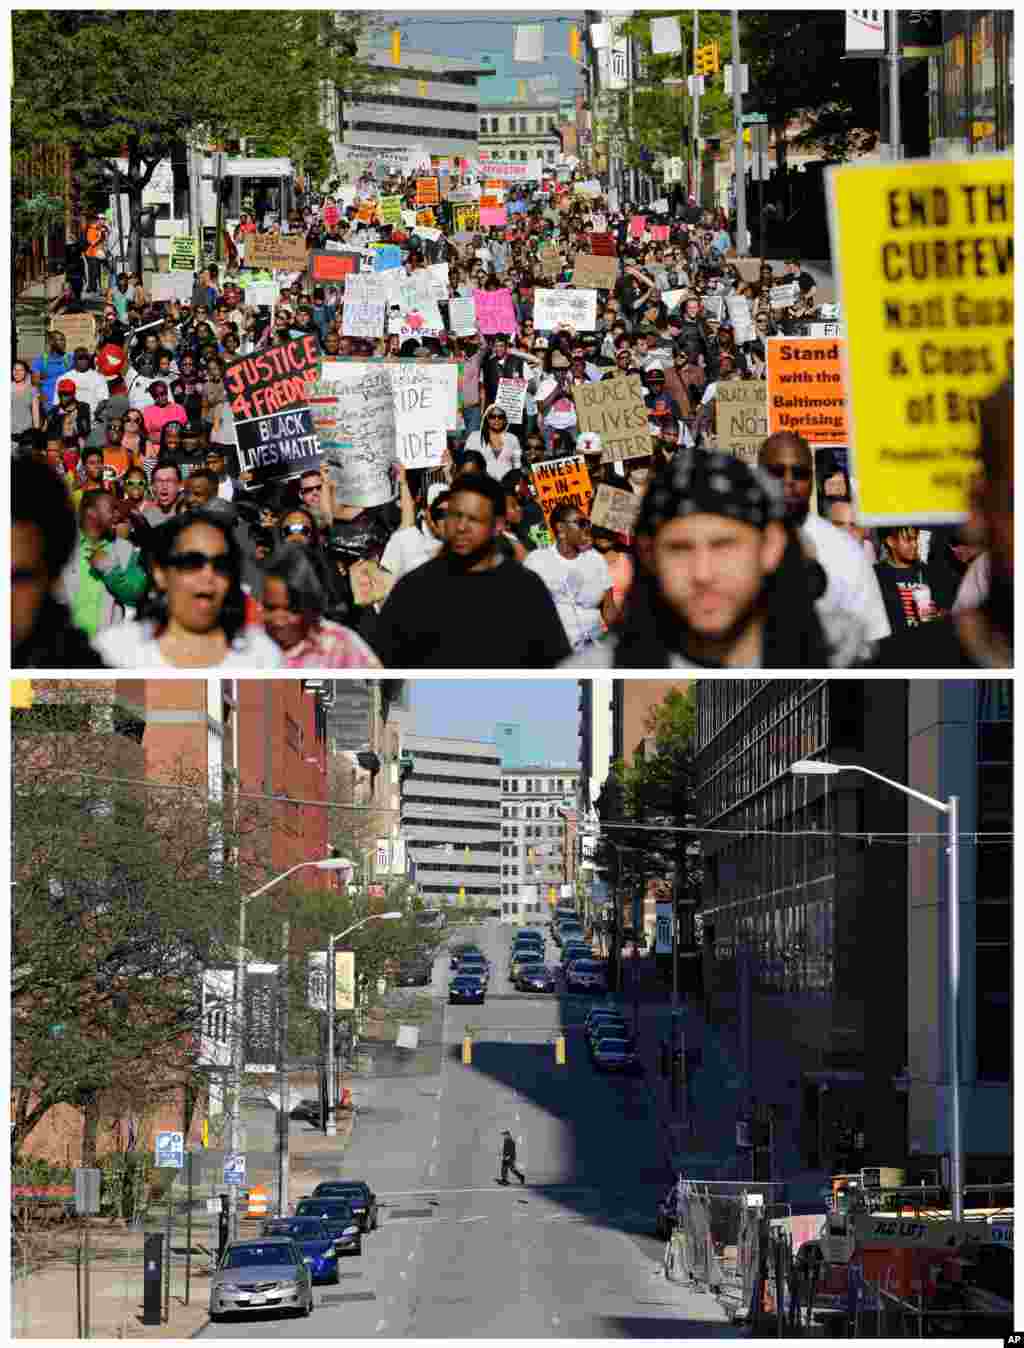 Protesters marching on May 2, 2015 in response to Freddie Gray's death, top, and a man crossing the same street on April 17, 2016, in Baltimore.